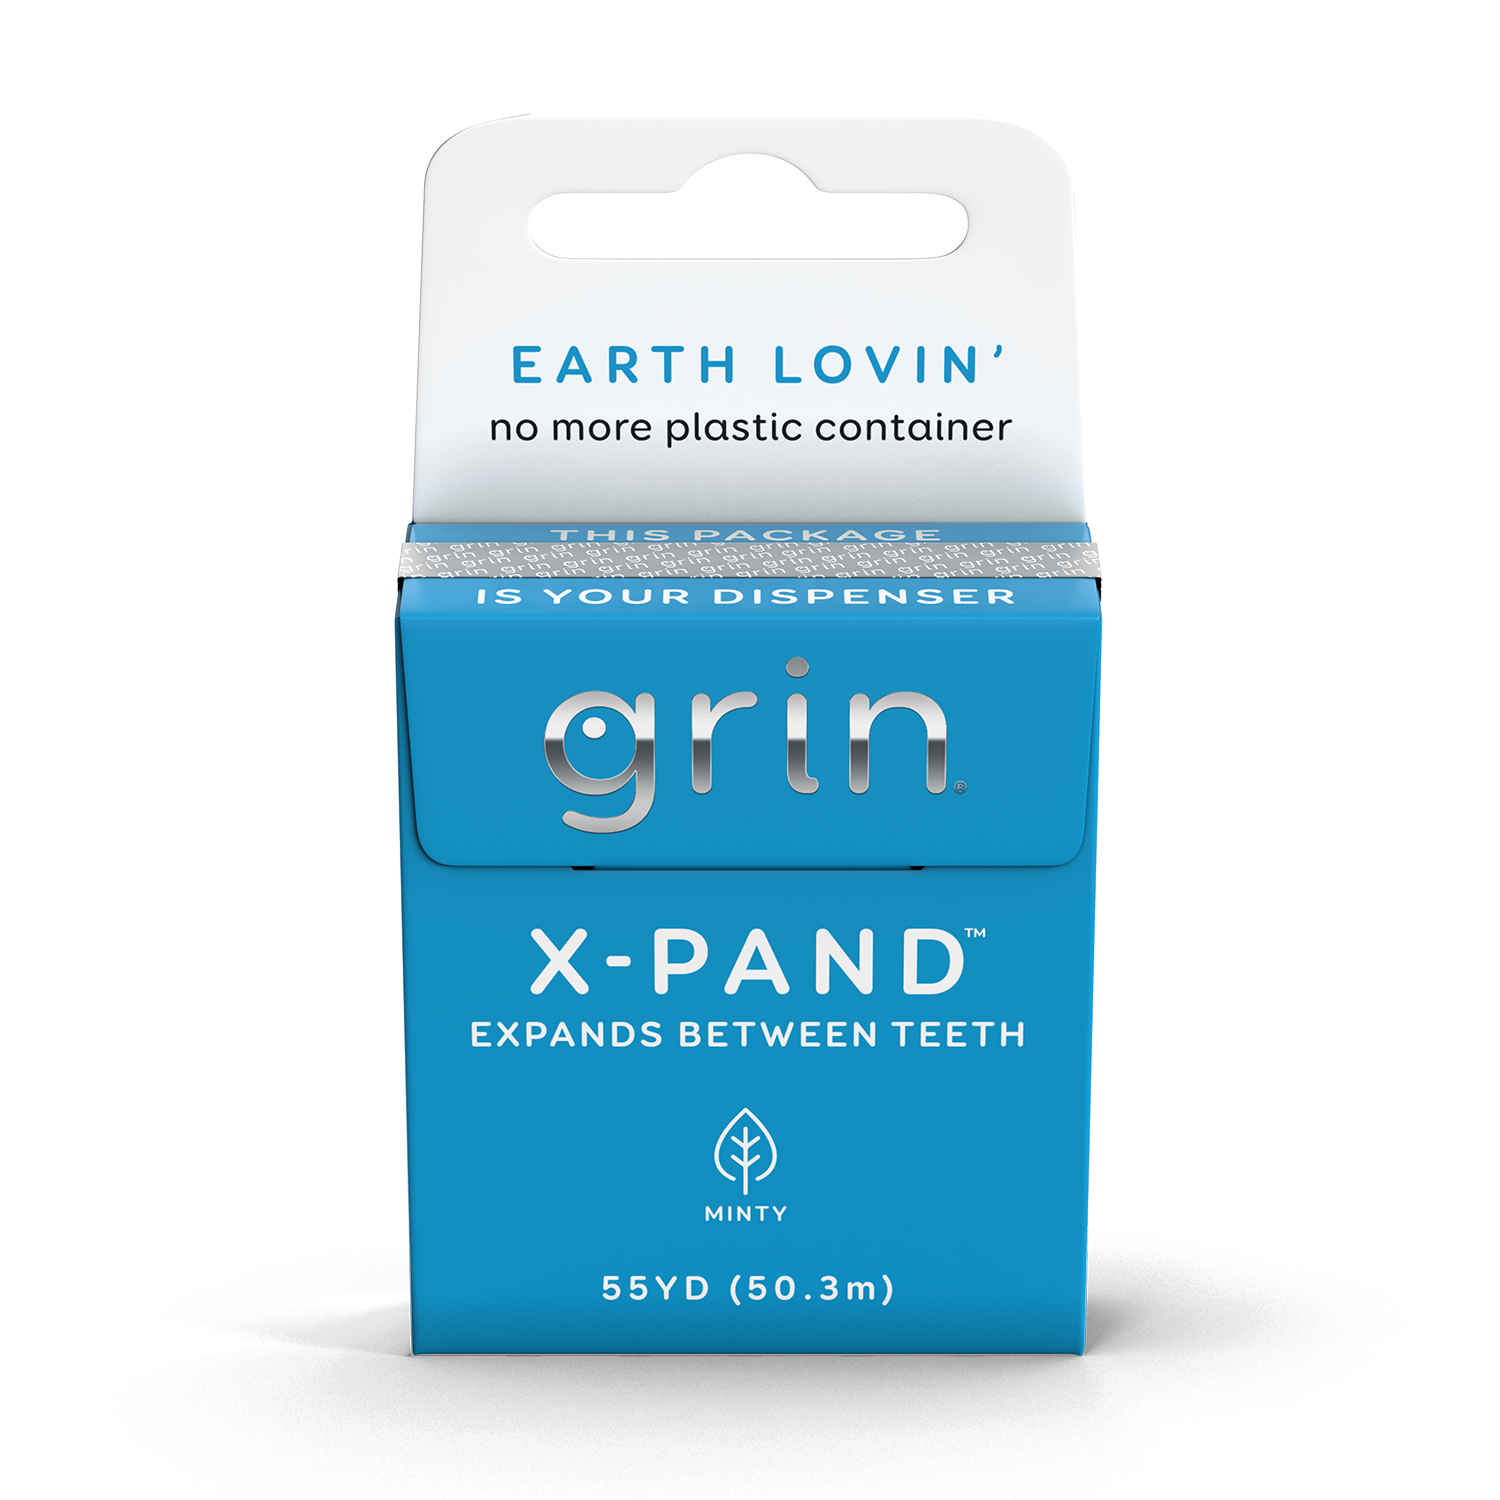 Grin Oral Care X-Pand Dental Floss